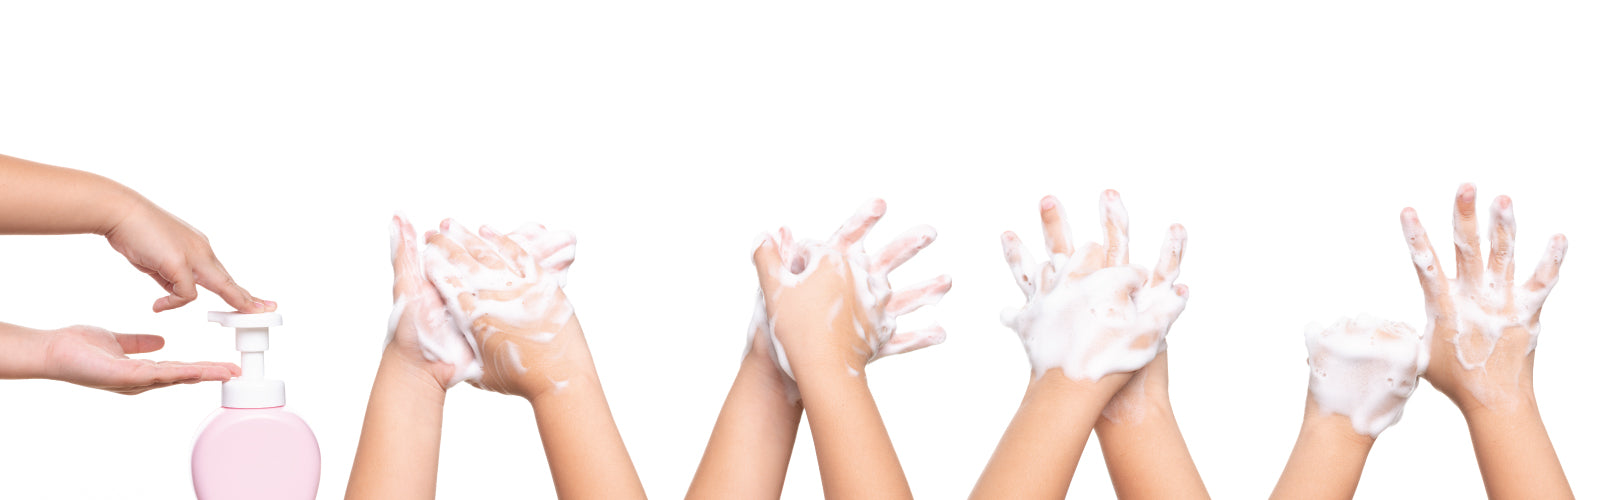 Healthy Habbit of Scrub And Sanitize: Why Washing Your Hands Is Important